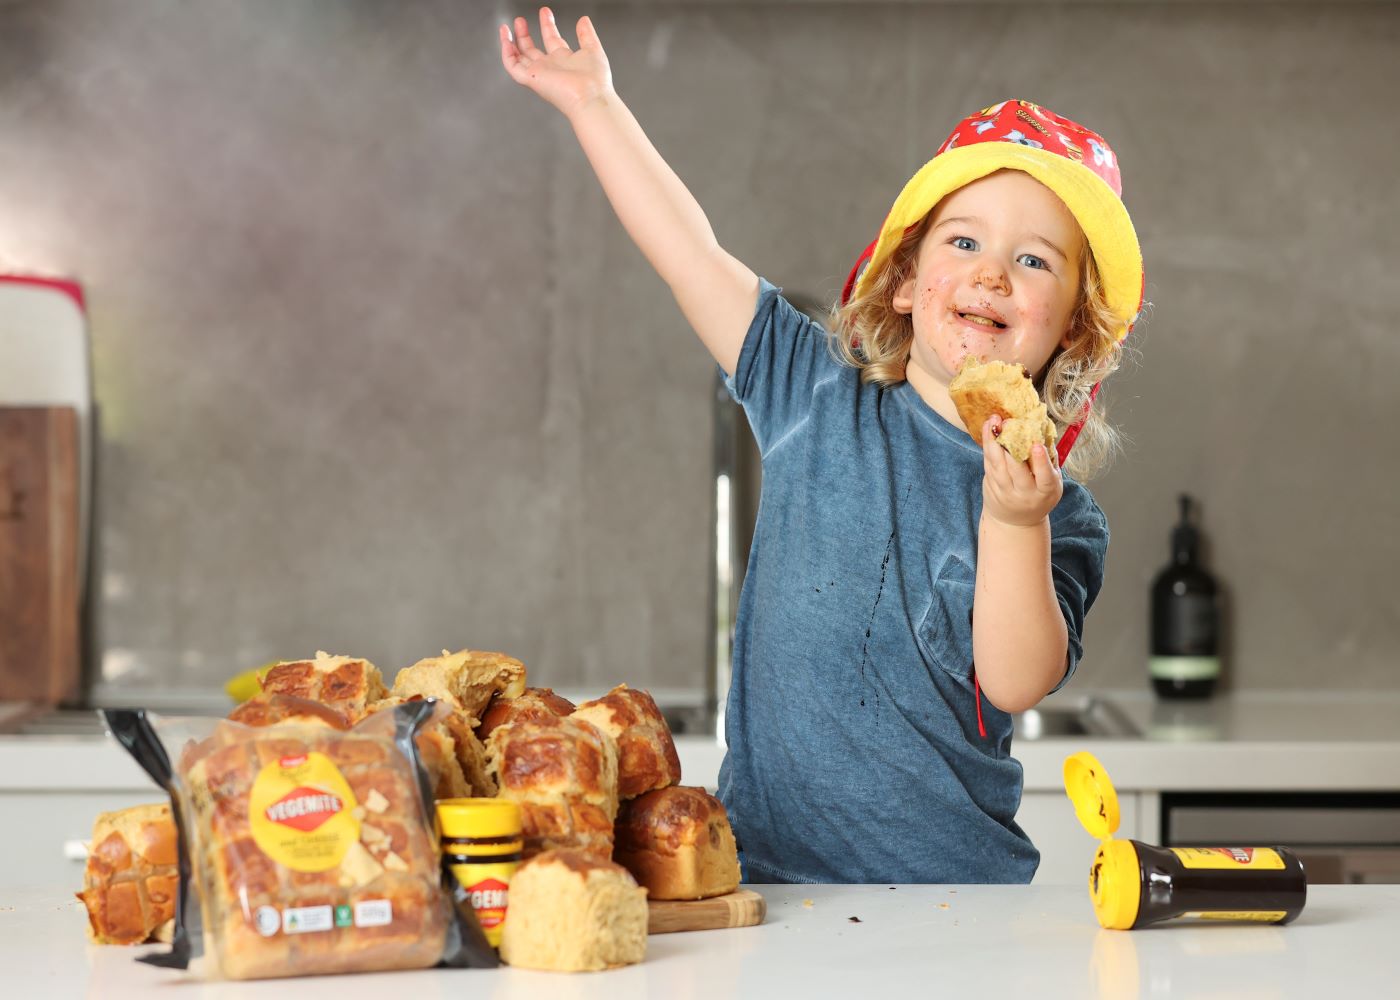 Vegemite Hot Cross Buns have now launched at Coles